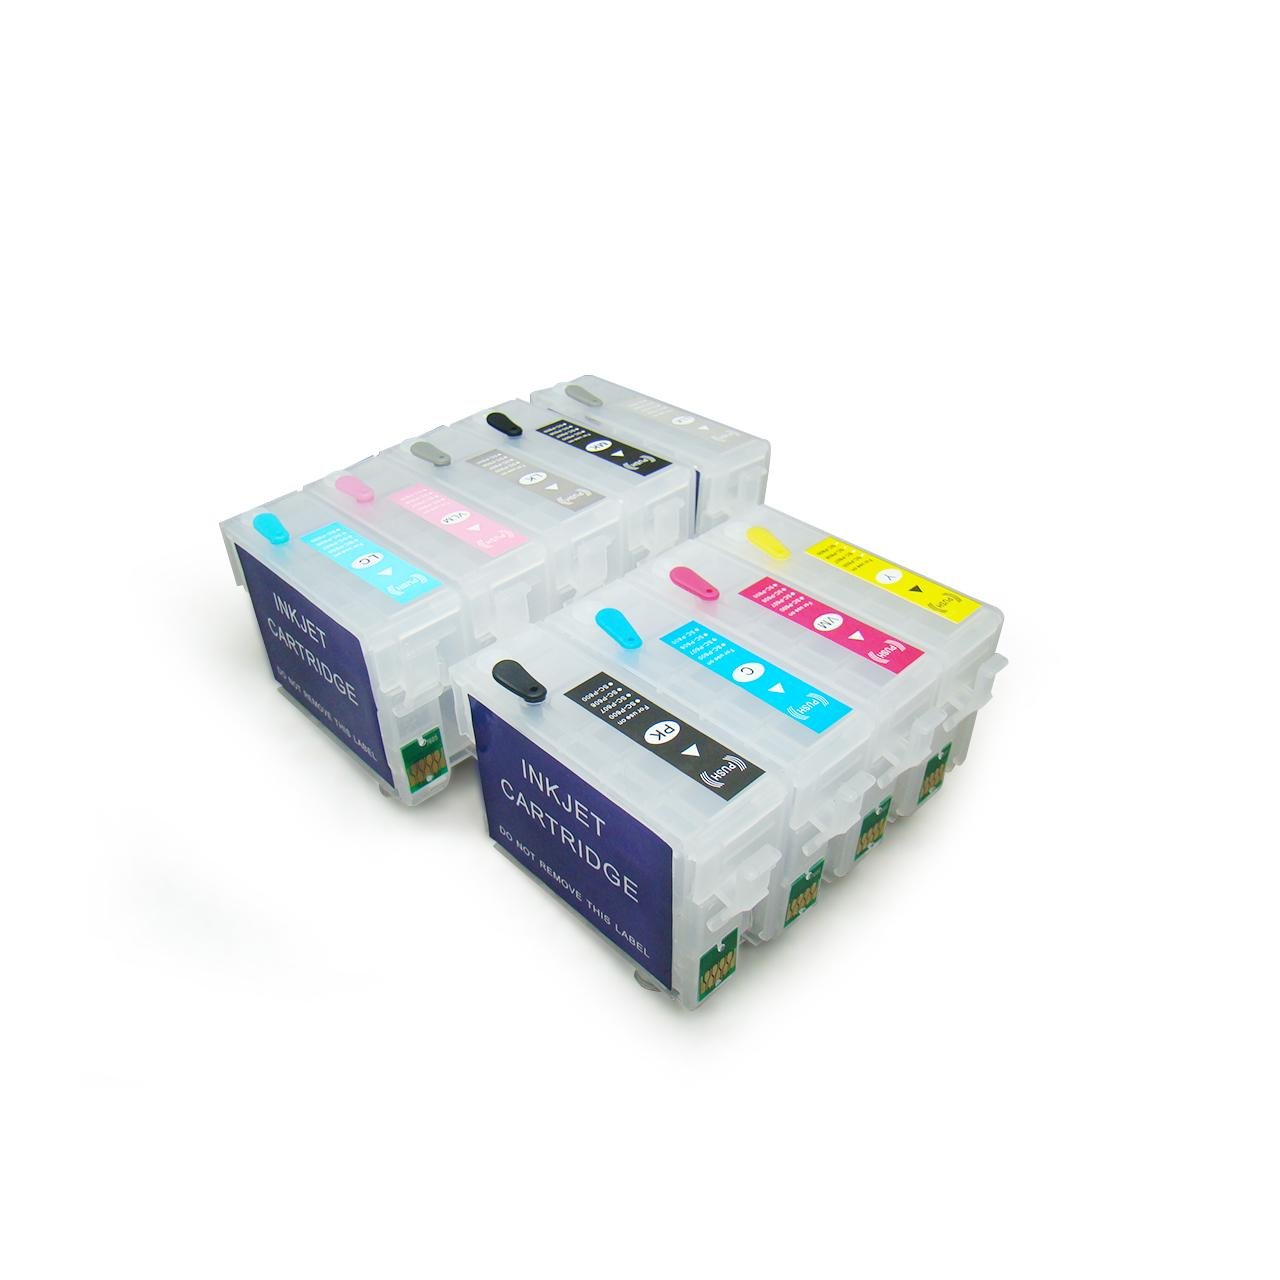 COLORTIME Refillable Ink Cartridges with auto reset chip for Epson stylus R3000  2